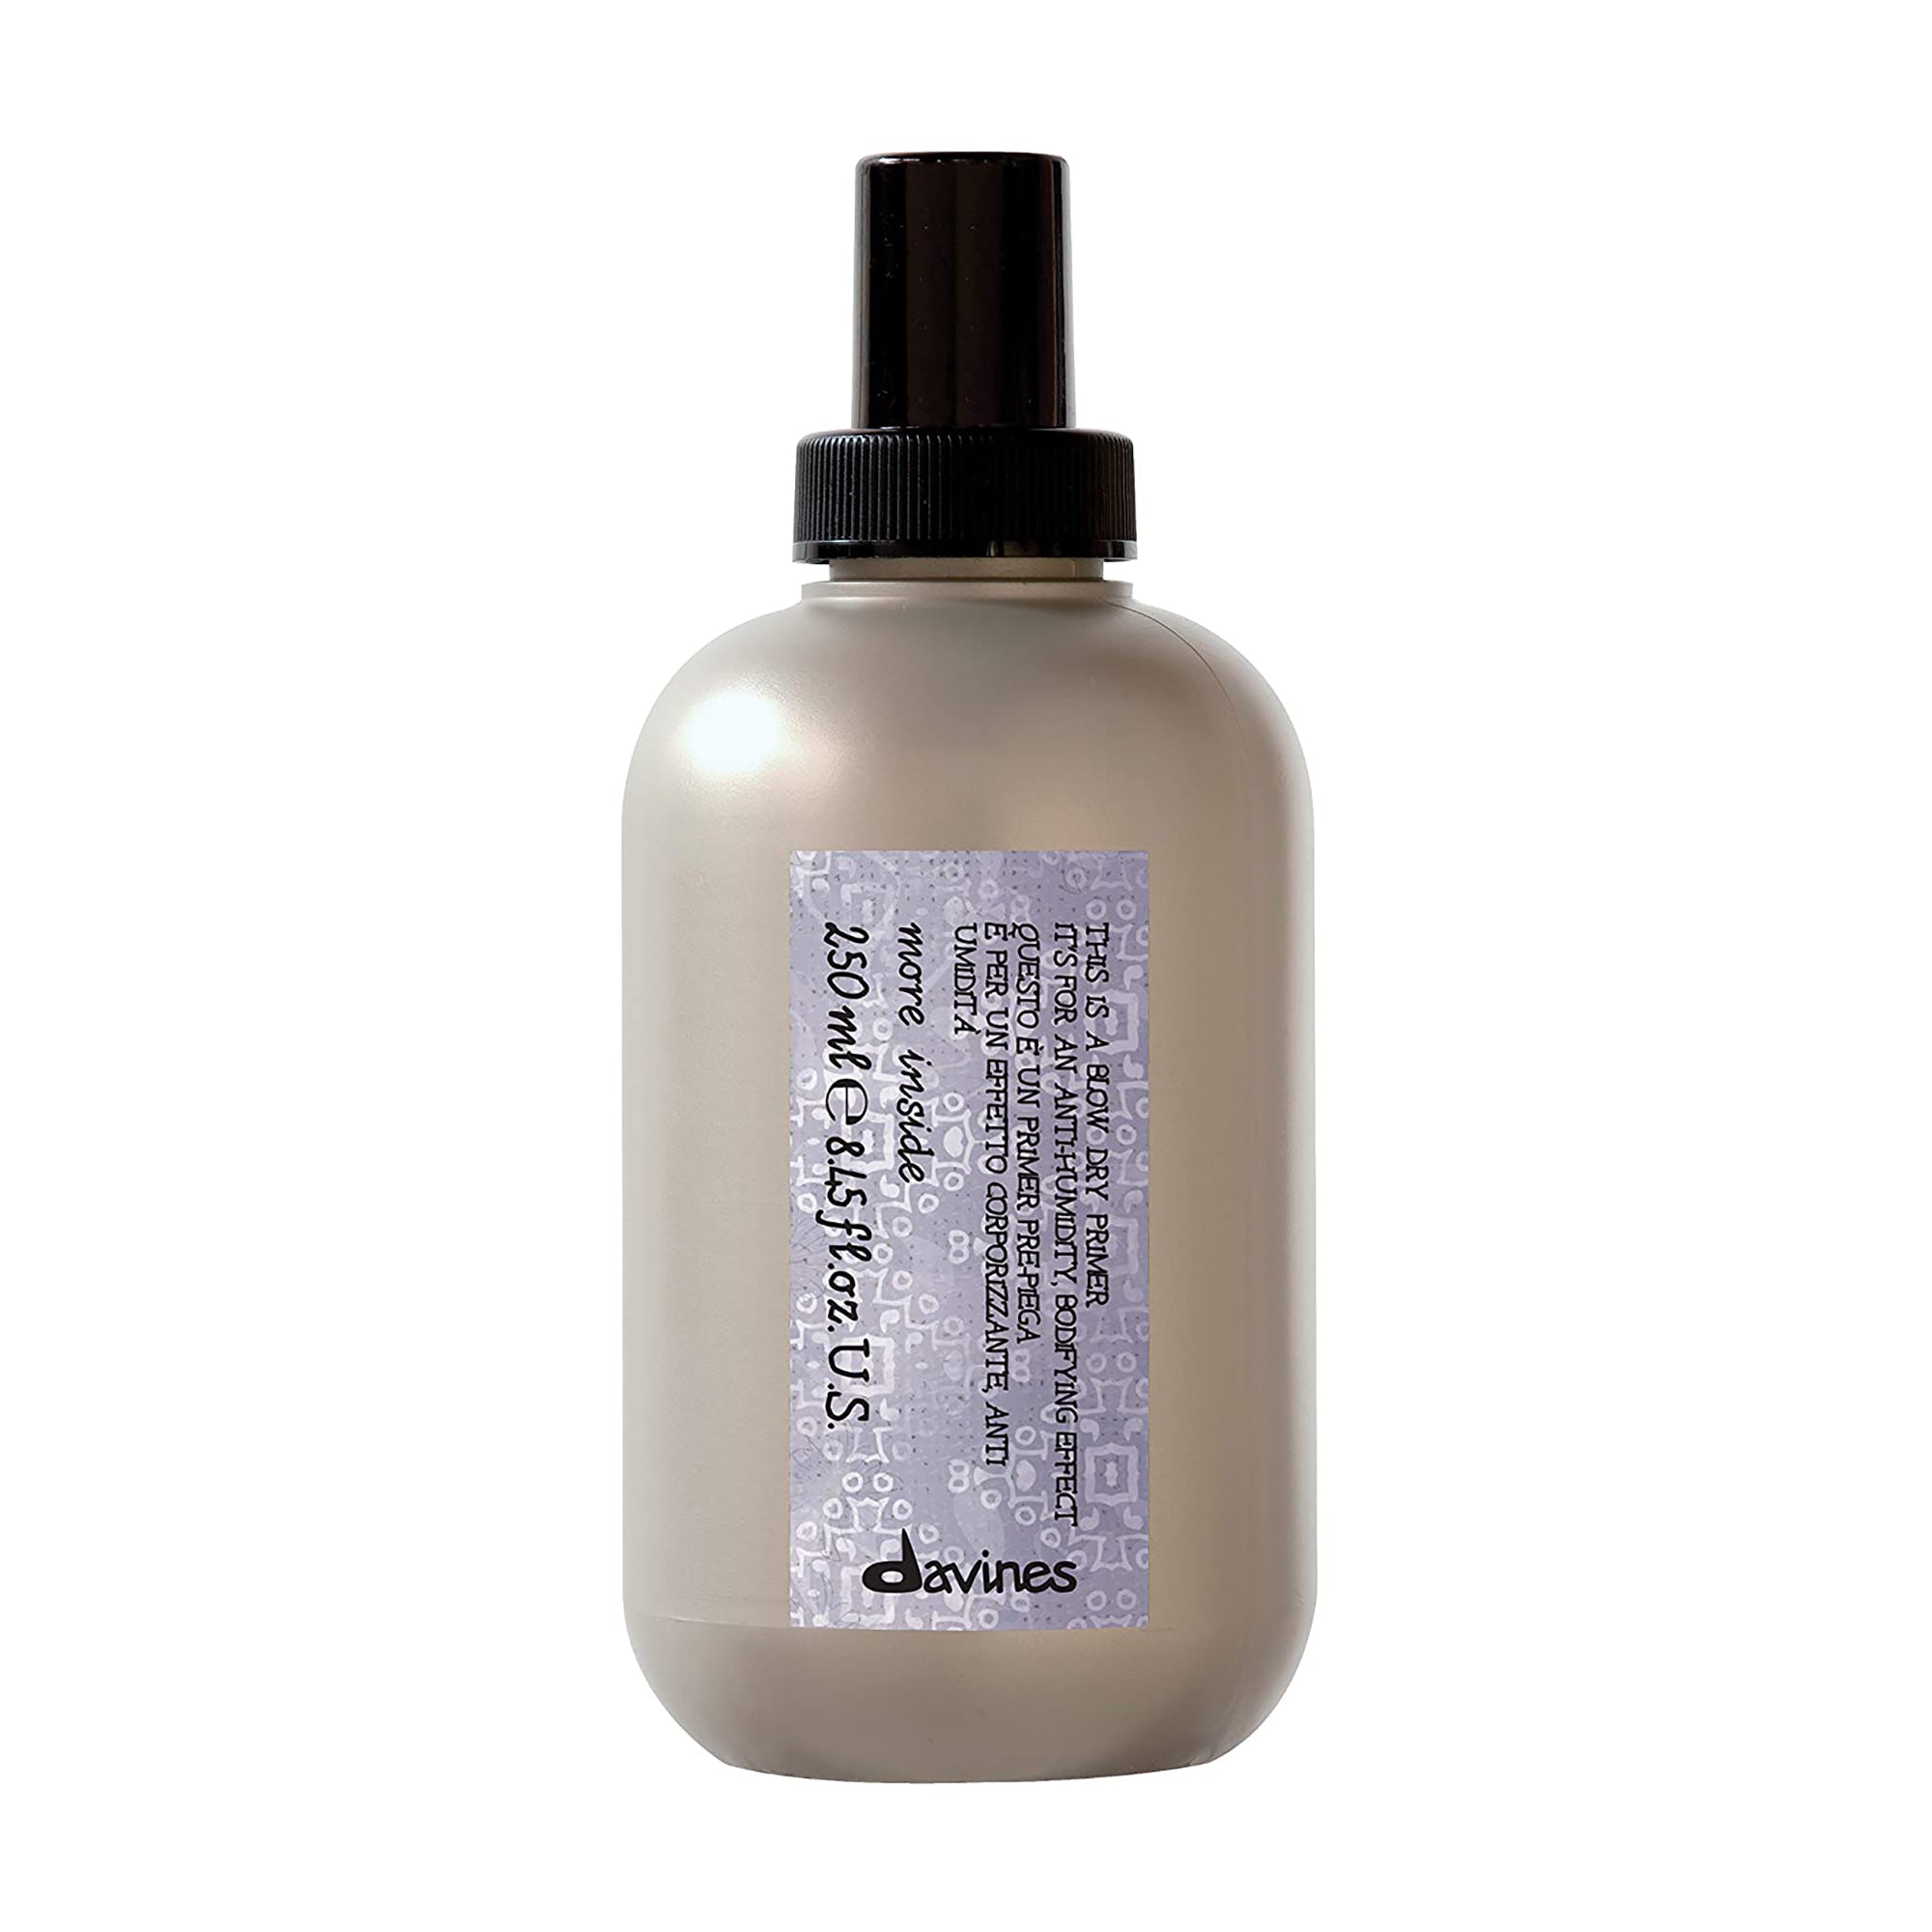 Davines This is a Blow Dry Primer / 8 OZ.